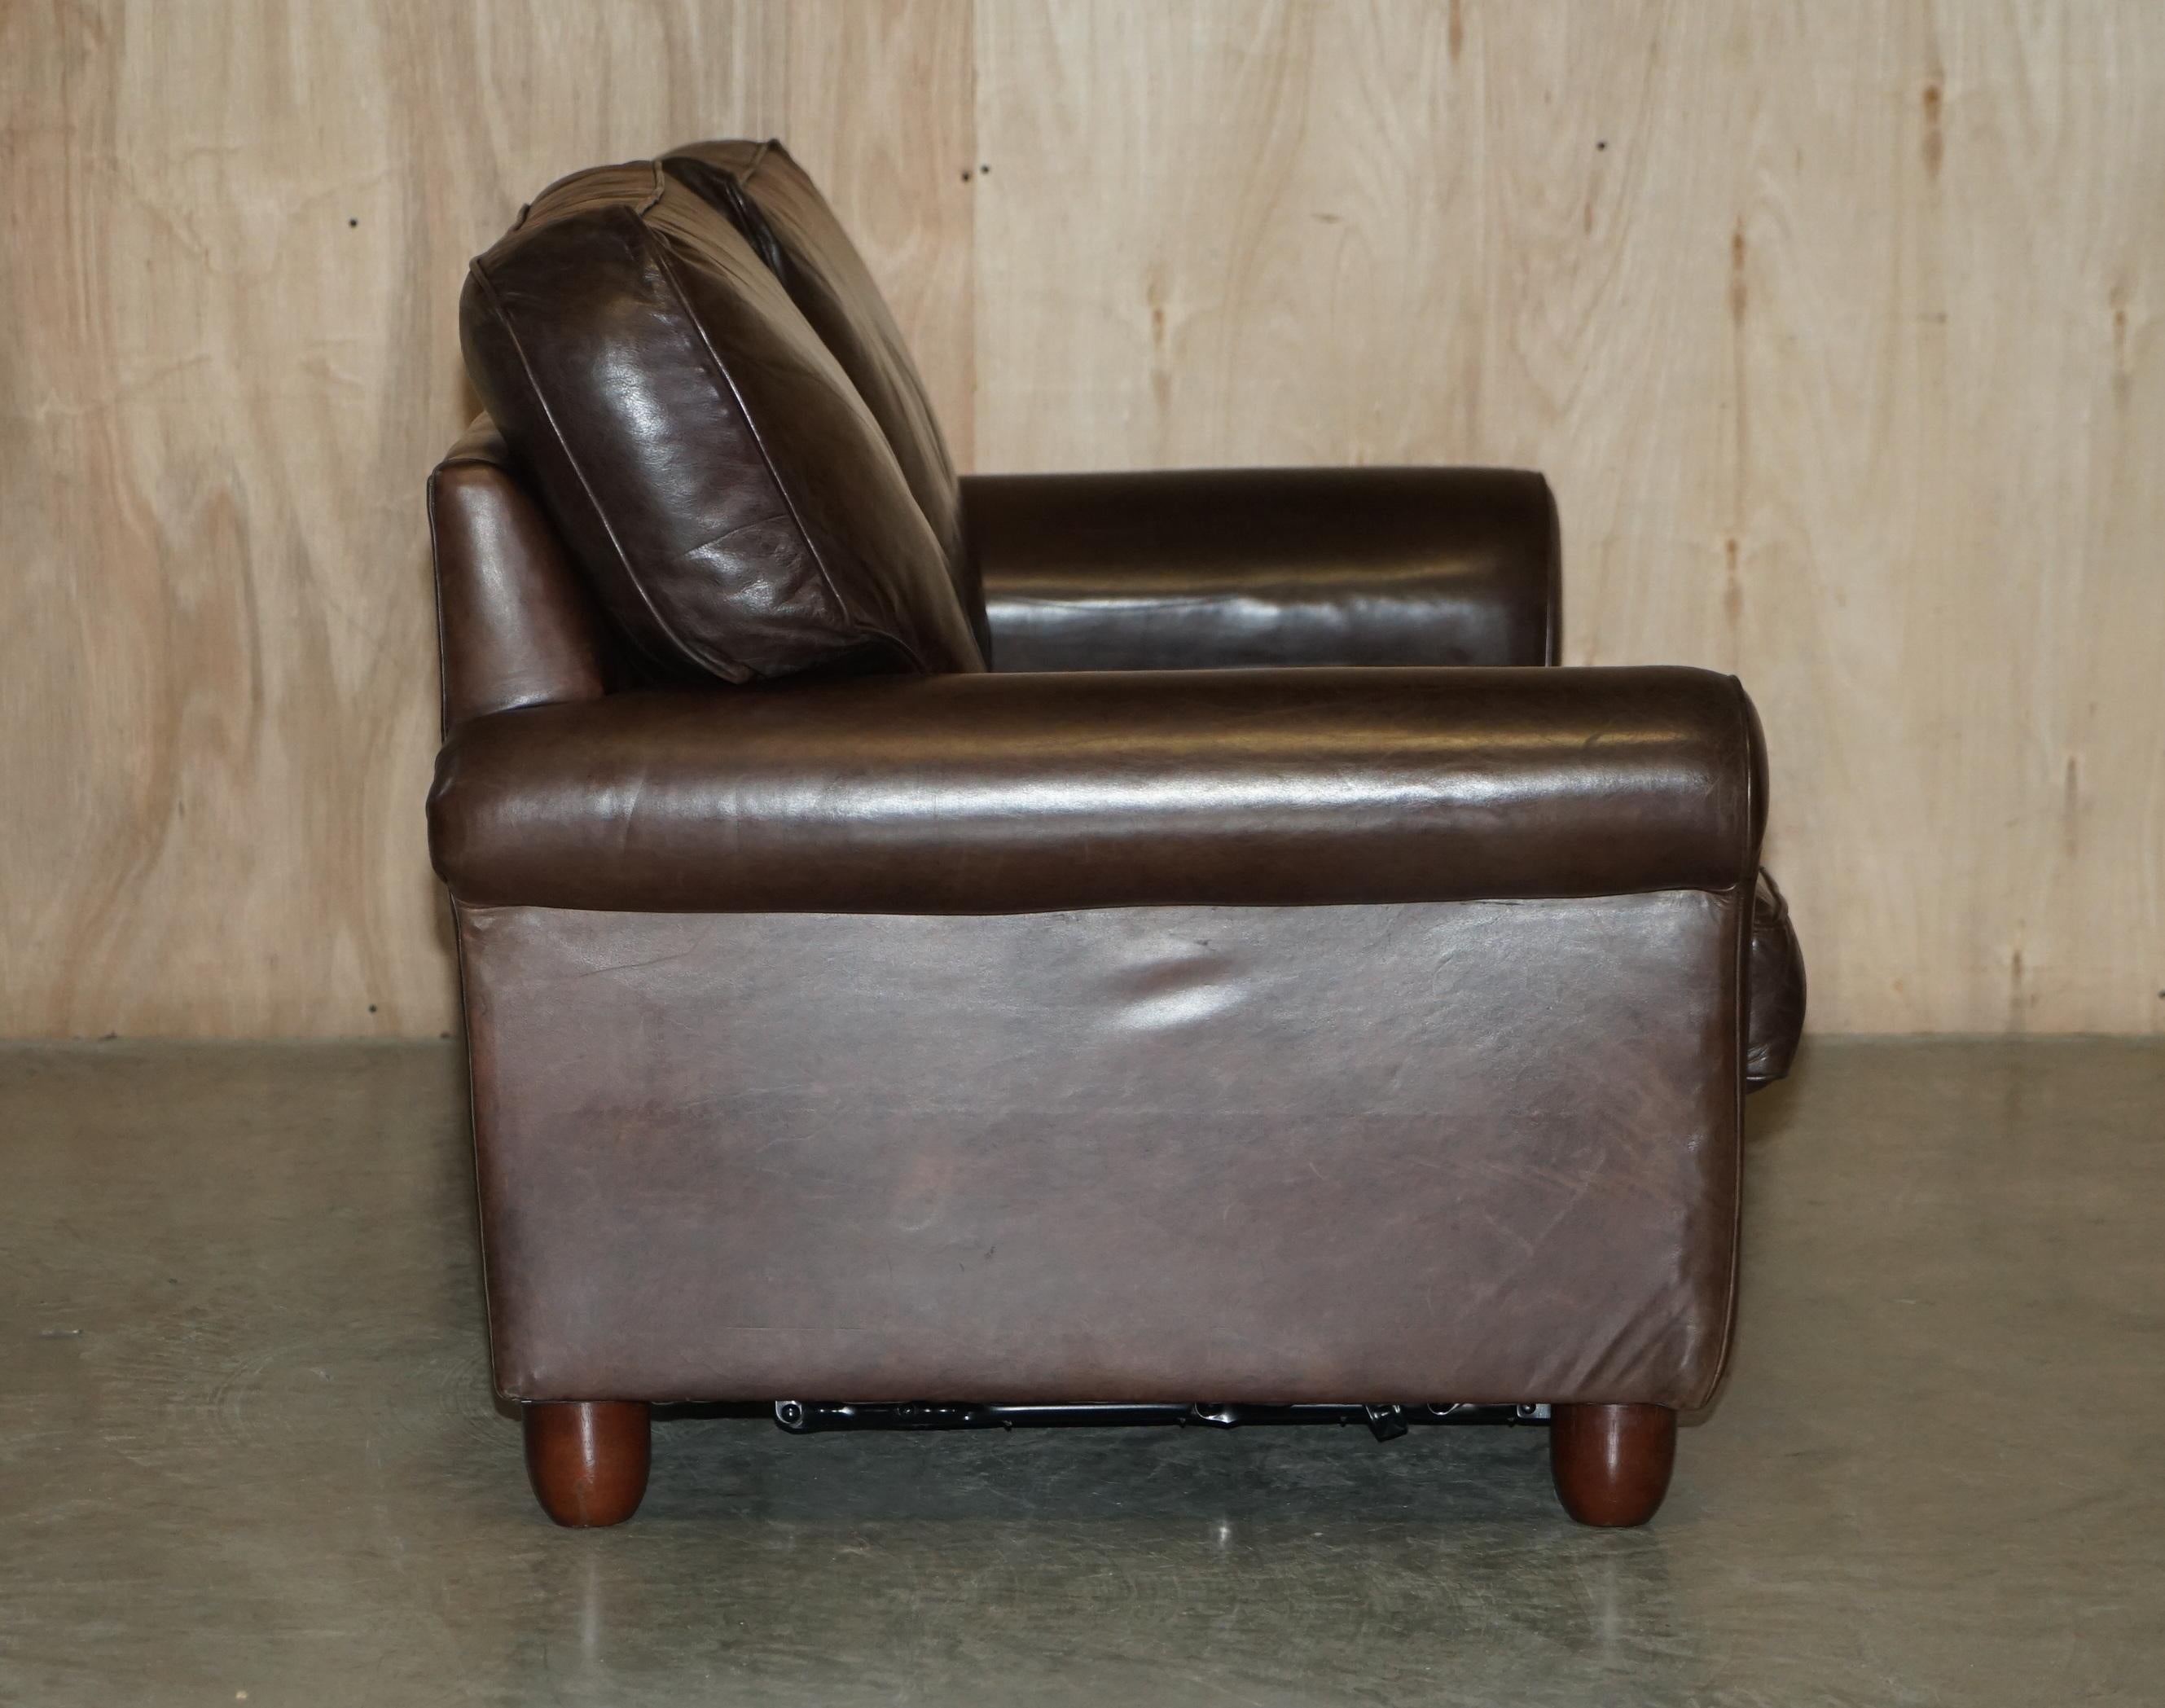 Lovely Heritage Brown Leather Laura Ashley Mortimer Sofabed in Very Nice Order For Sale 2